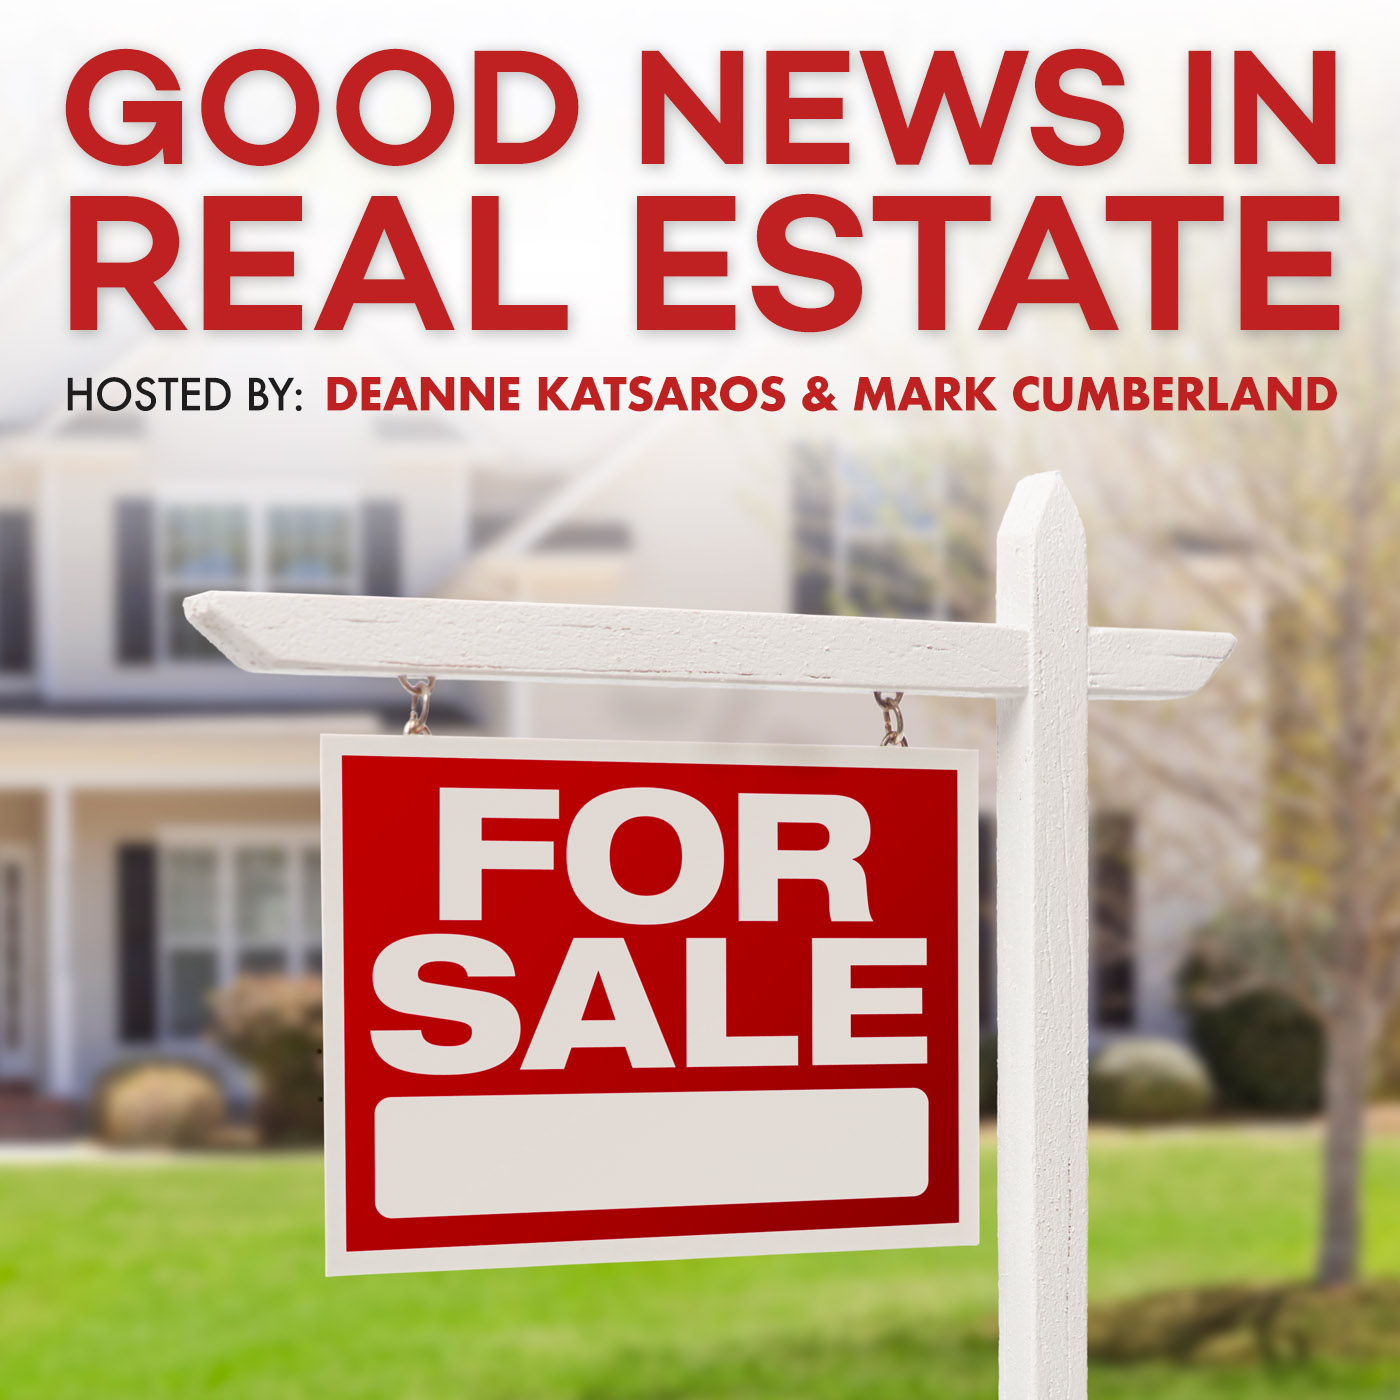 January 31, 2021 | Good News In Real Estate